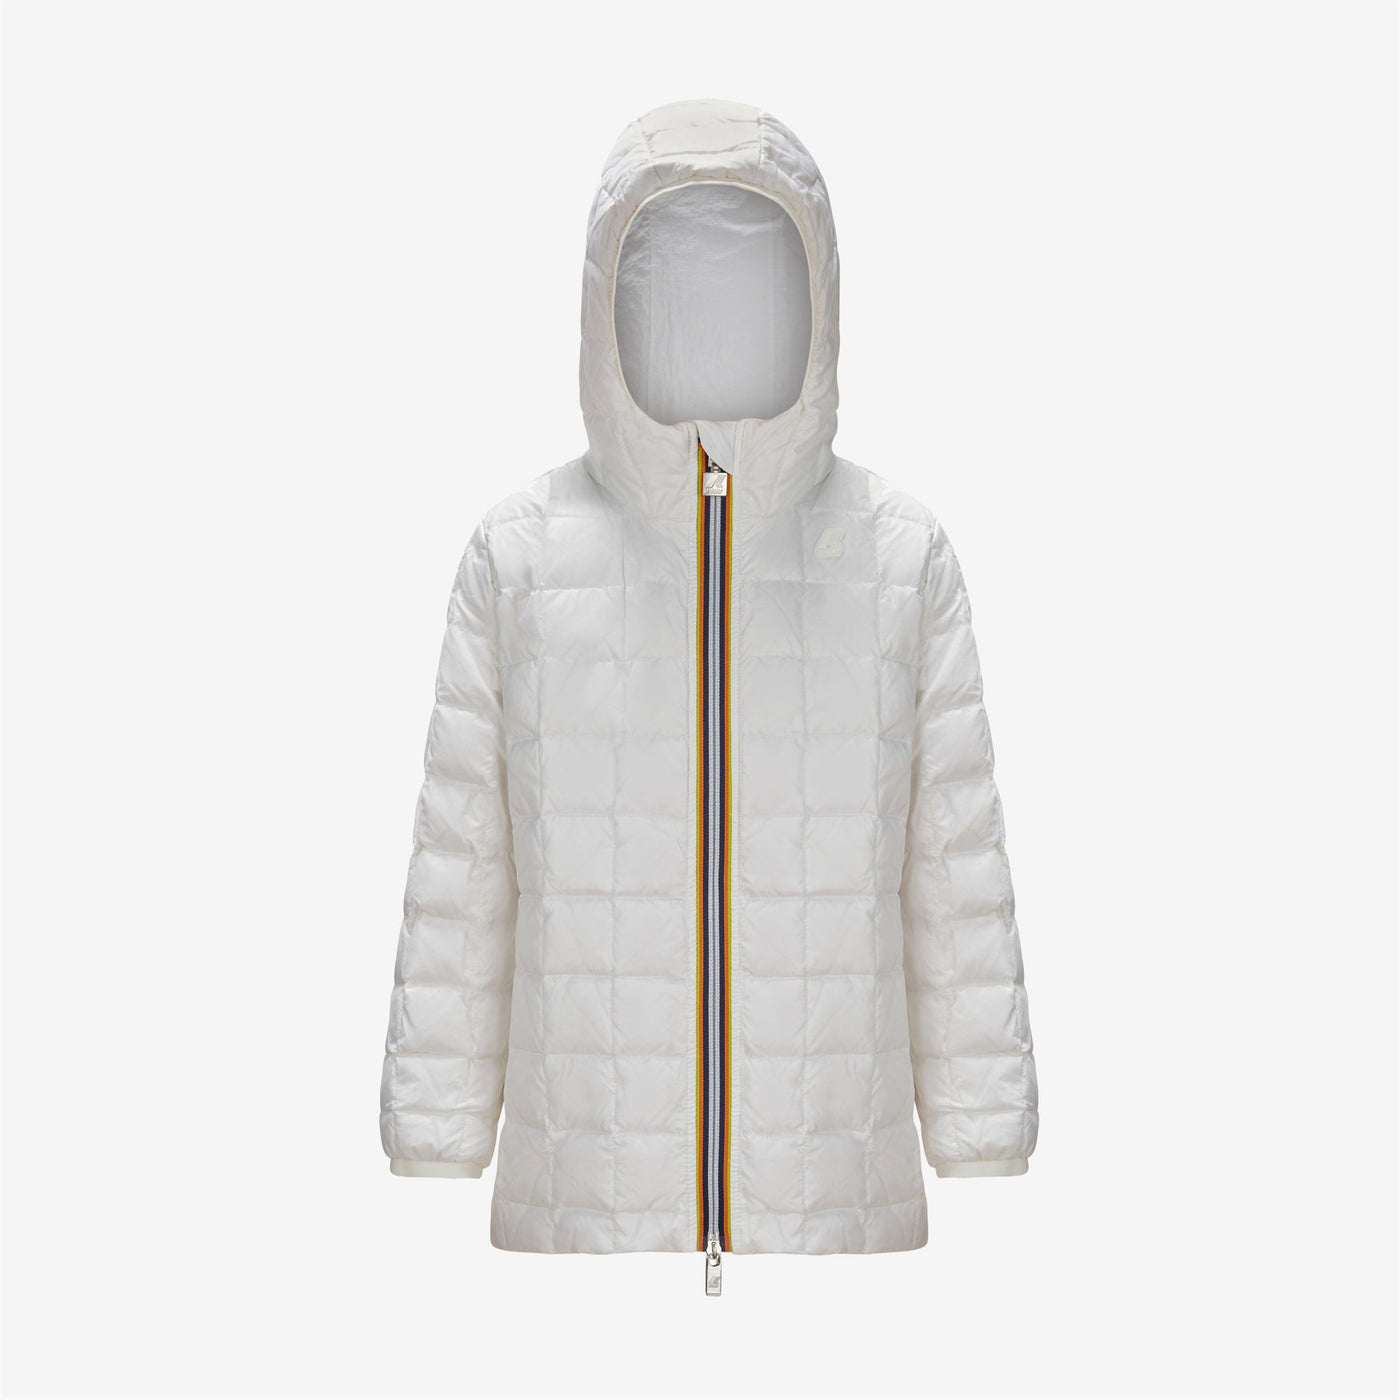 Jackets Girl P. SOPHIE TD BRILLIANT RIPSTOP 3/4 Length WHITE Dressed Front (jpg Rgb)	